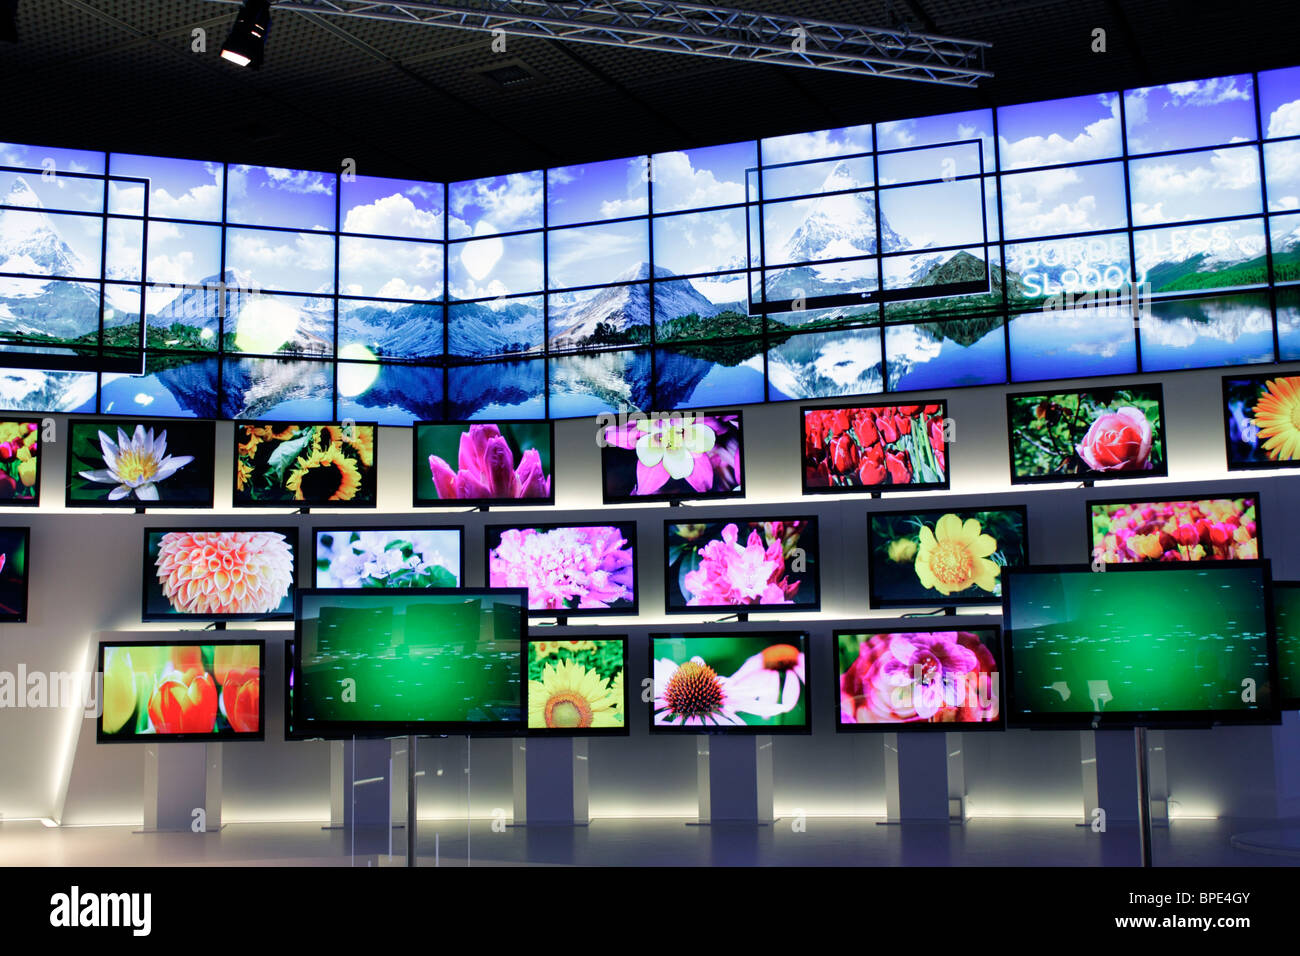 Berlin, IFA, Consumer Electronics Unlimited, many flat screens, LED TV, SL9000 Borderless, in an artistic installation by LG. Stock Photo